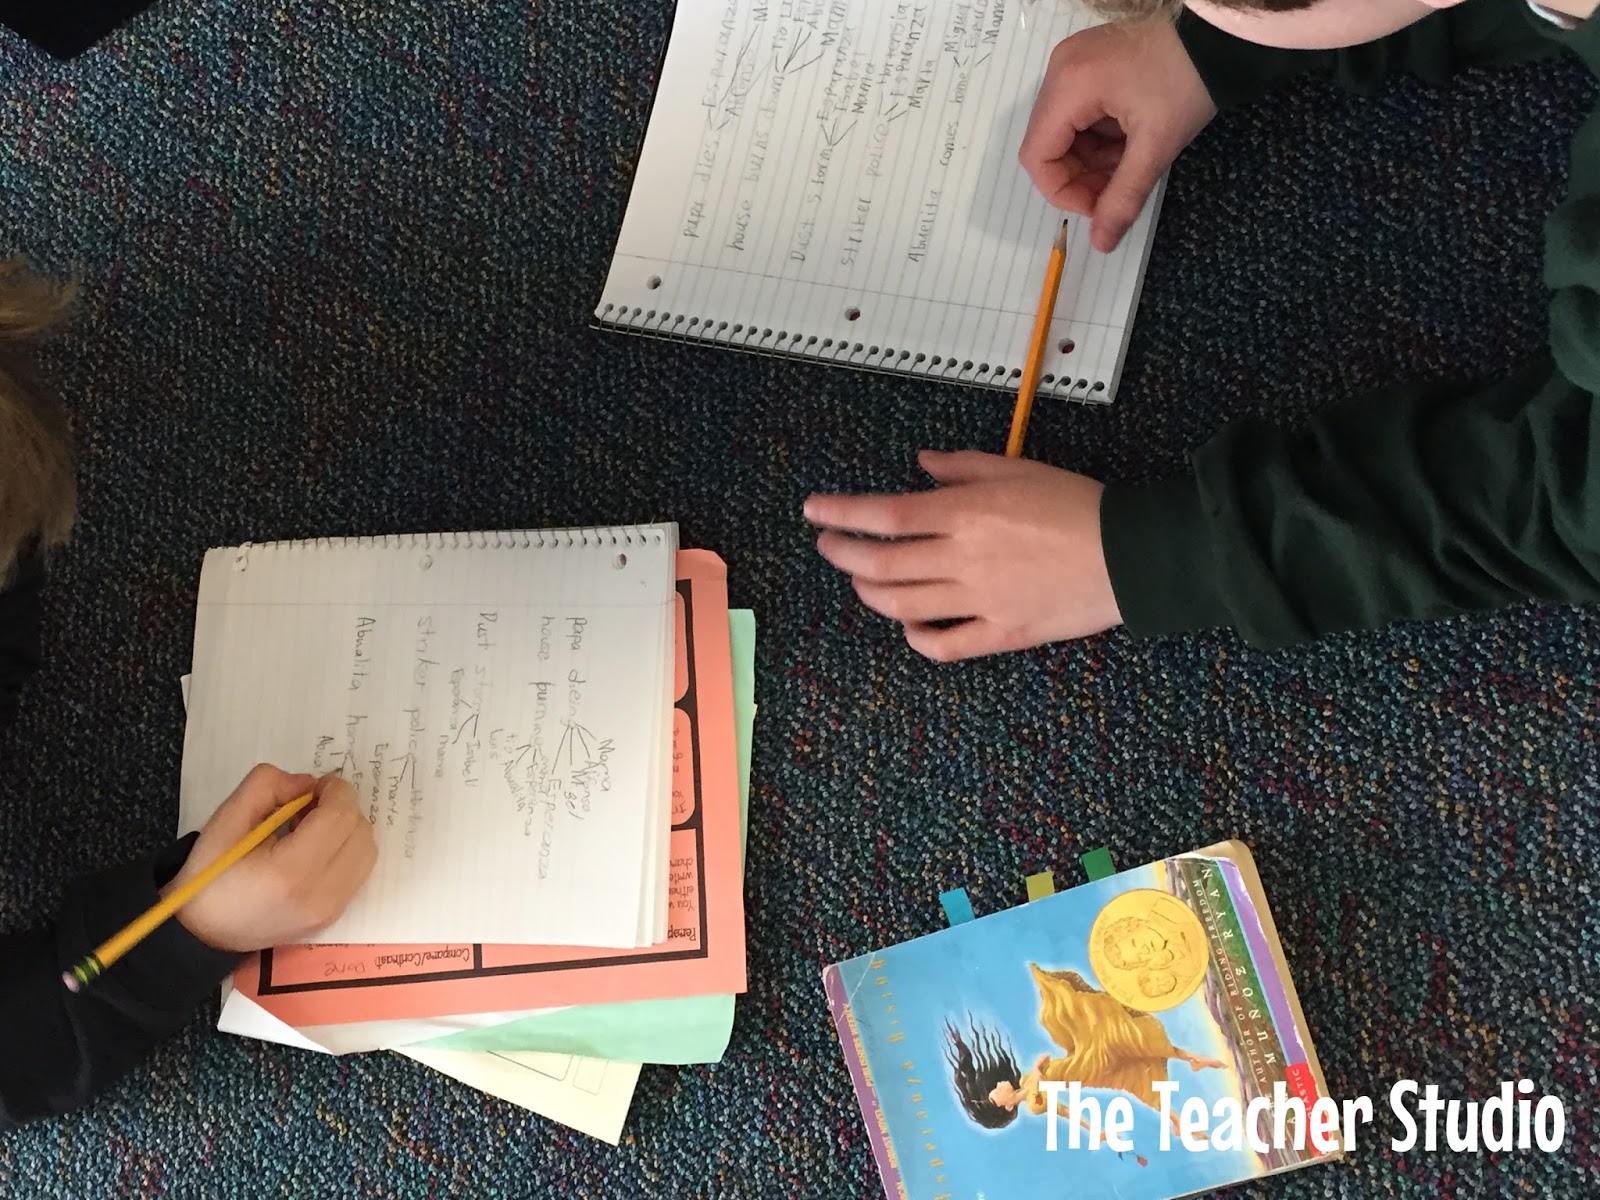 Writing about reading, point of view, compare and contrast, event study, characters, writing about characters, comparing and contrasting characters, historical fiction, creative writing, providing evidence, writing paragraphs, writing process